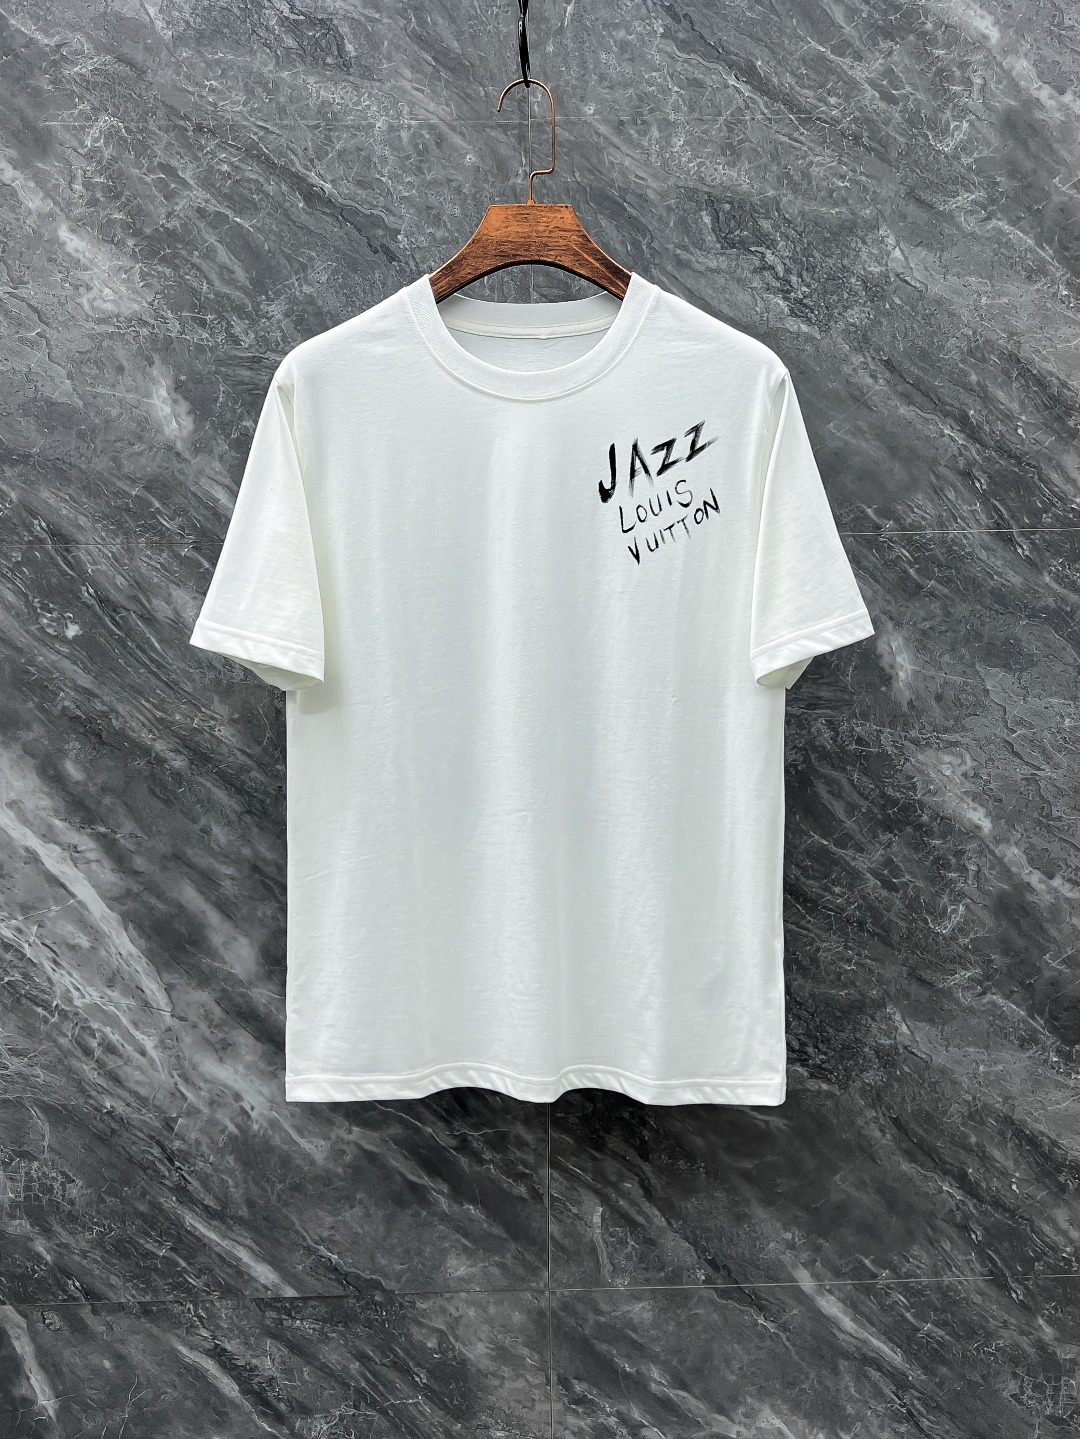 Louis Vuitton Clothing T-Shirt Black White Spring/Summer Collection Fashion Short Sleeve